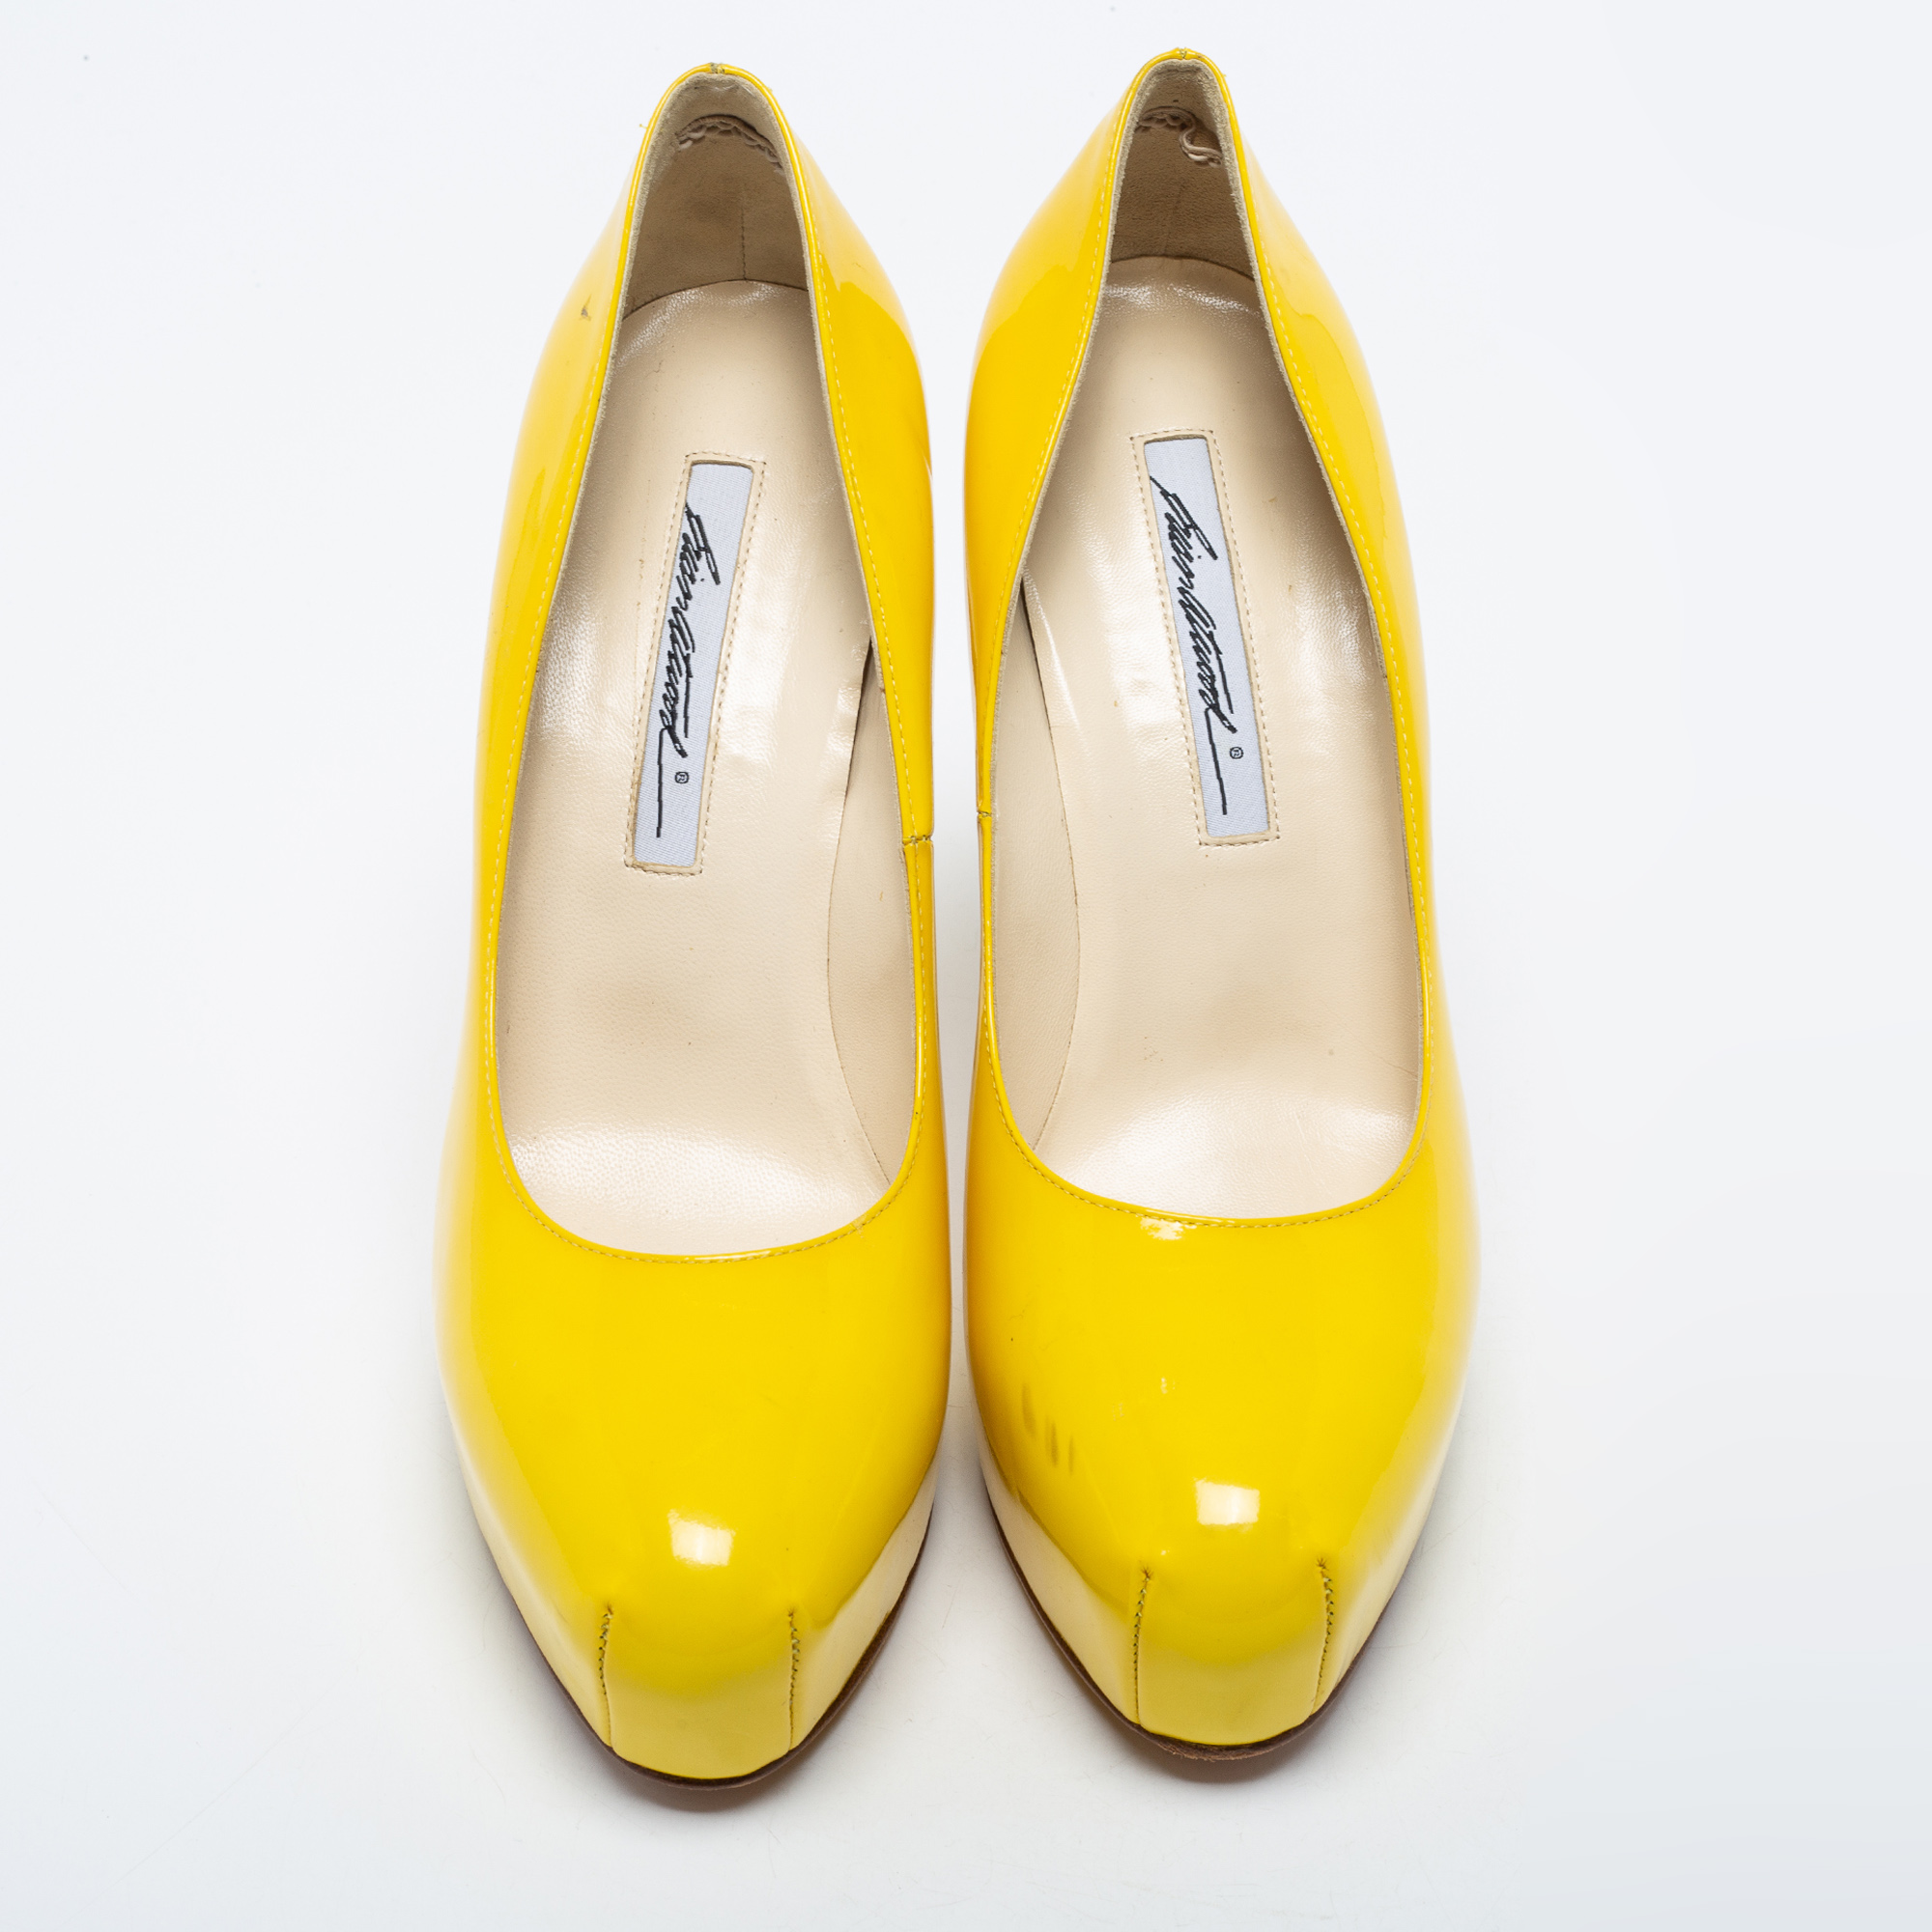 Brian Atwood Yellow Patent Leather Platform Pumps Size 39